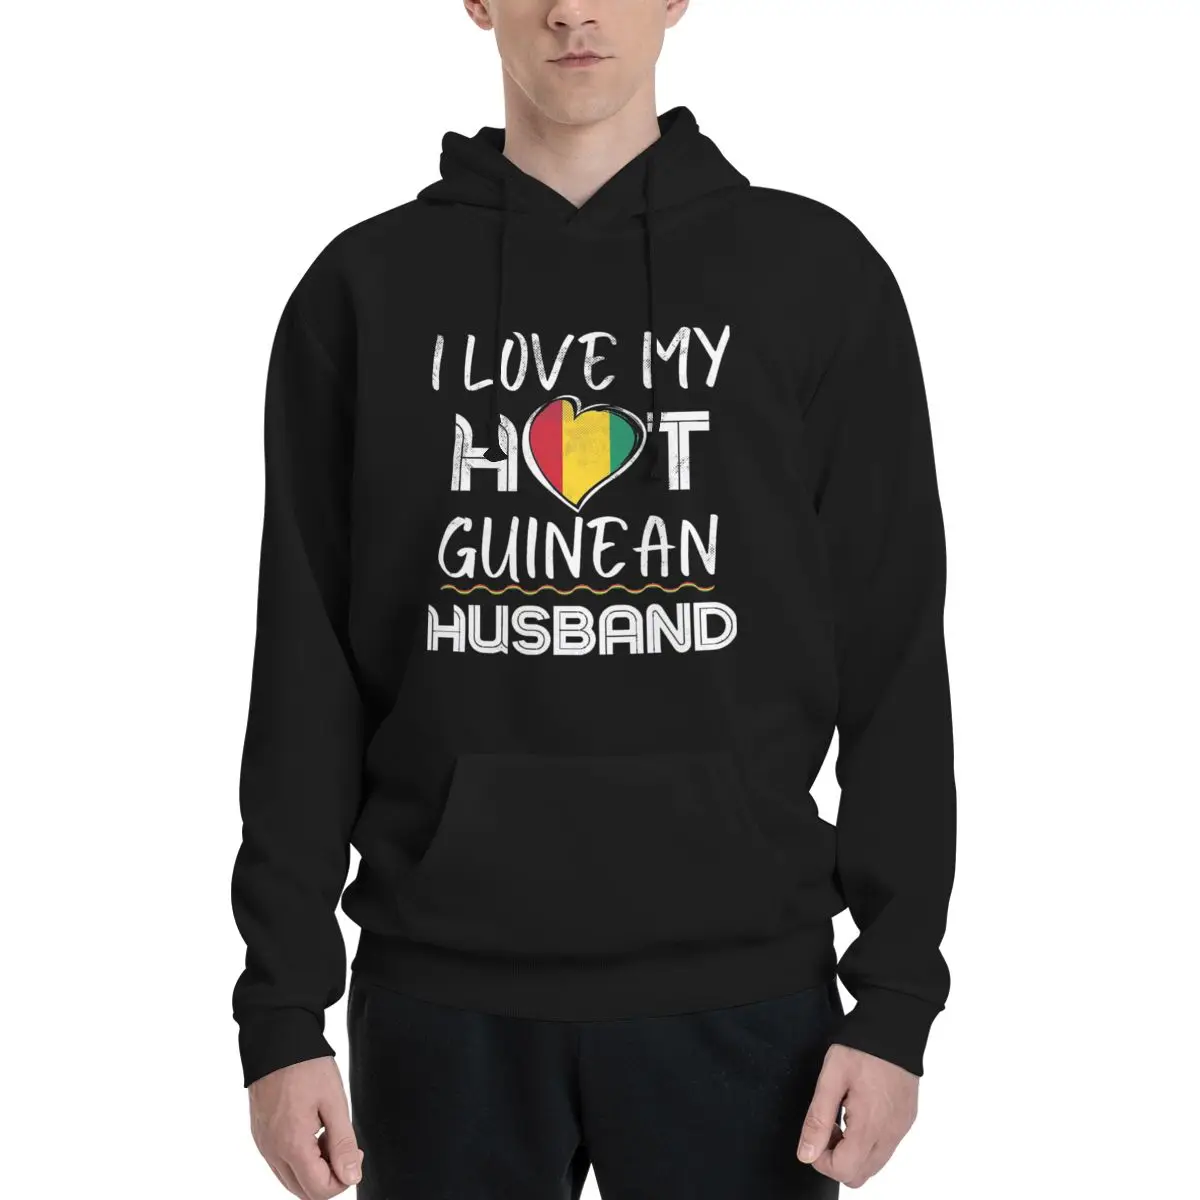 

Funny Guinean Husband Proud Wife Polyester Hoodie Men's Women's Sweater Size XXS-3XL